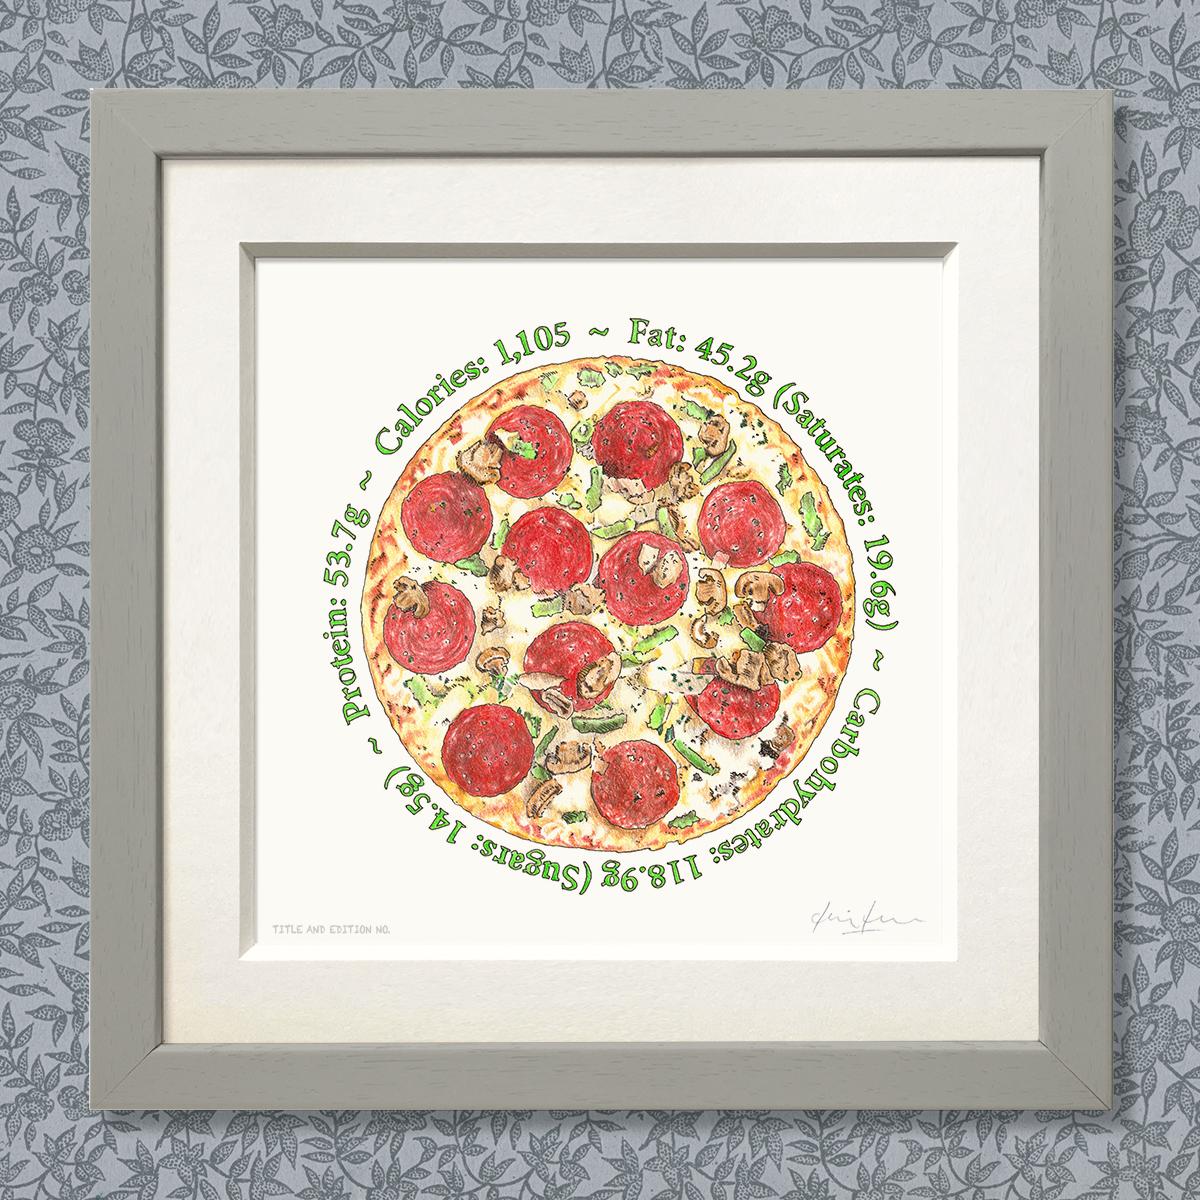 Limited edition print of coloured drawing of pizza, in a grey frame.